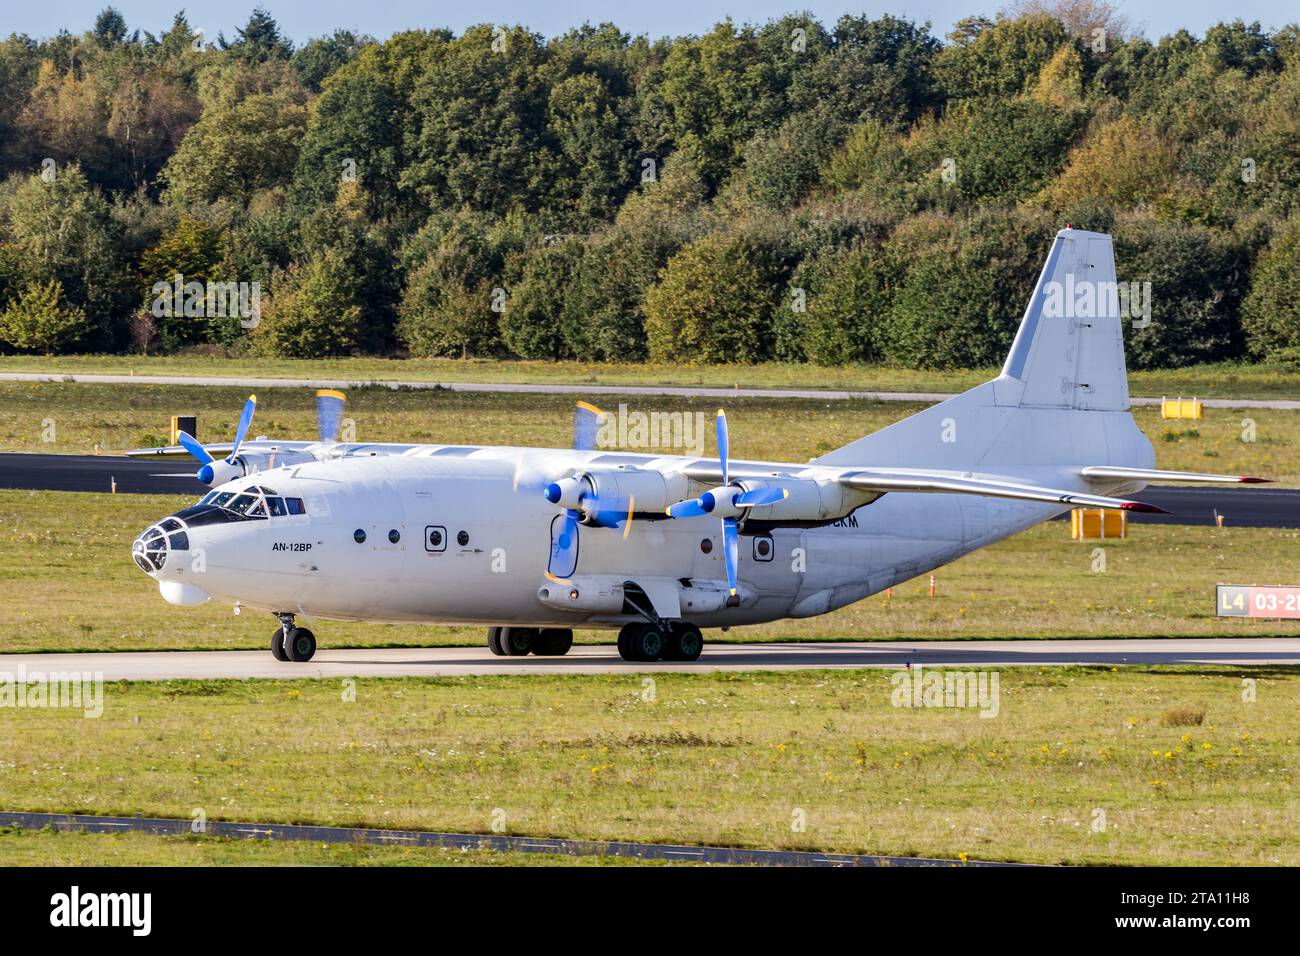 Ukrainian Antonov An-12 cargo plane arriving at Eindhoven airport. The Netherlands- OCtober 27, 2017. Stock Photo